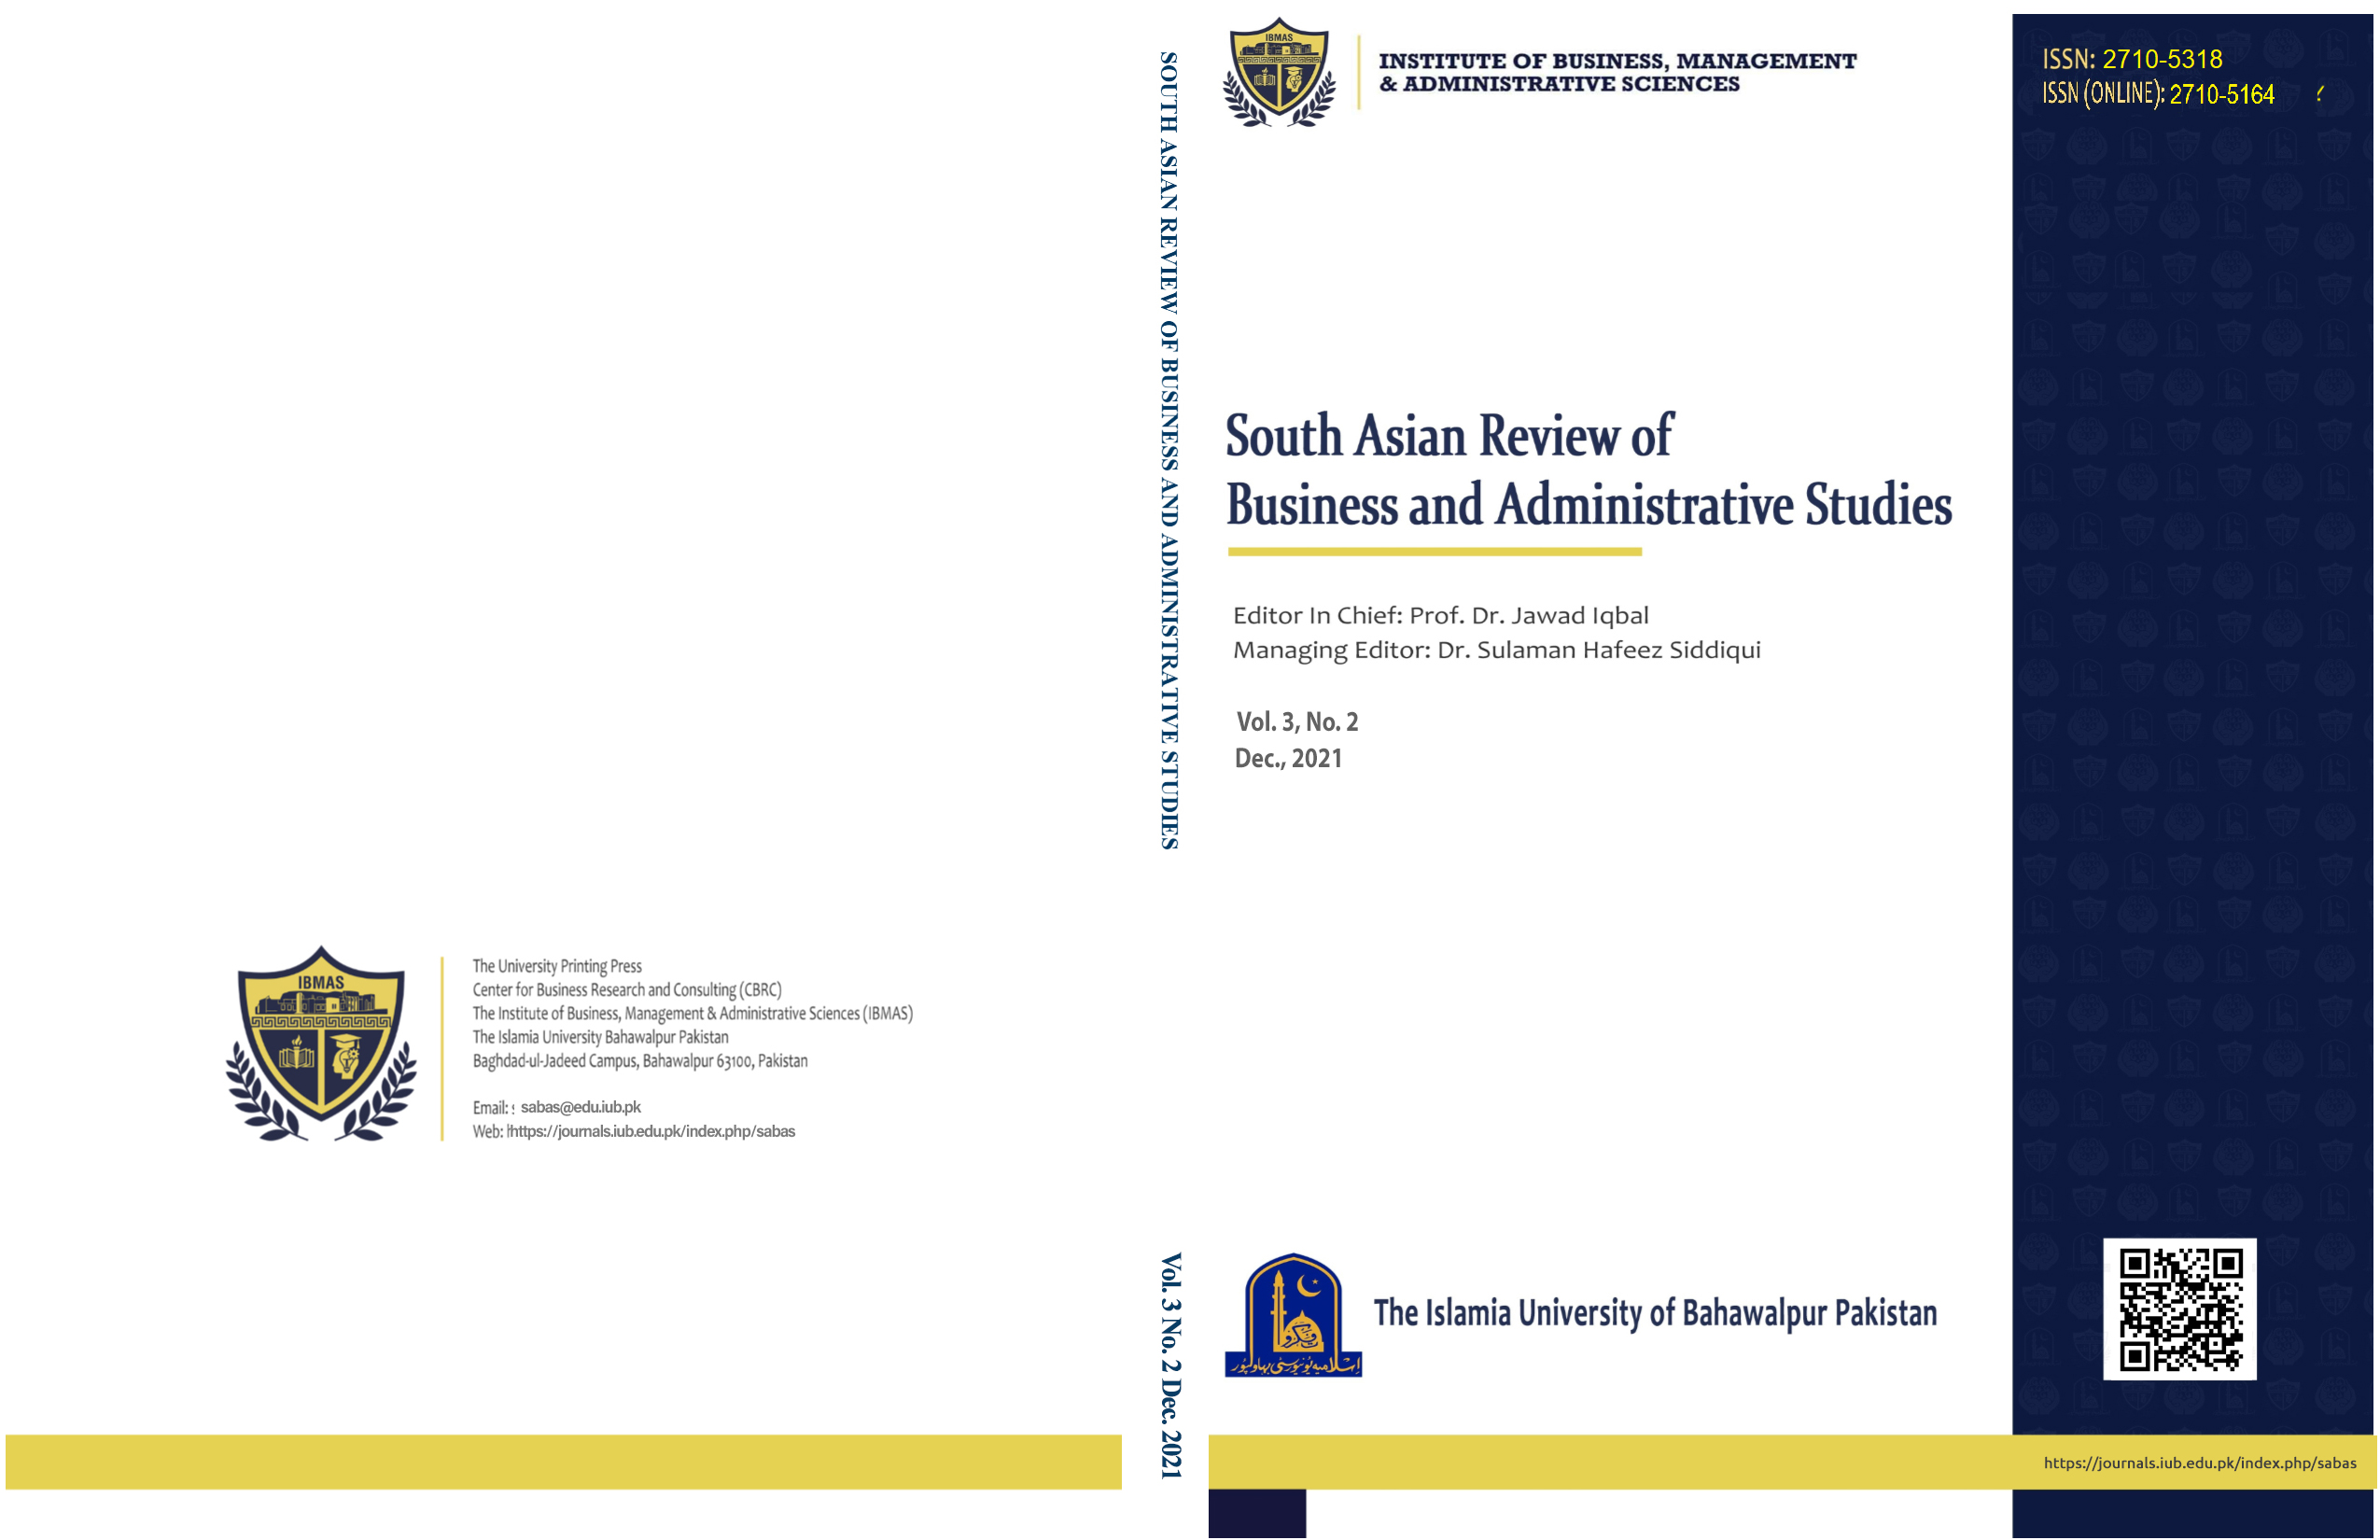 					View Vol. 4 No. 1 (2022): South Asian Review of Business and Administrative Studies (SABAS)
				